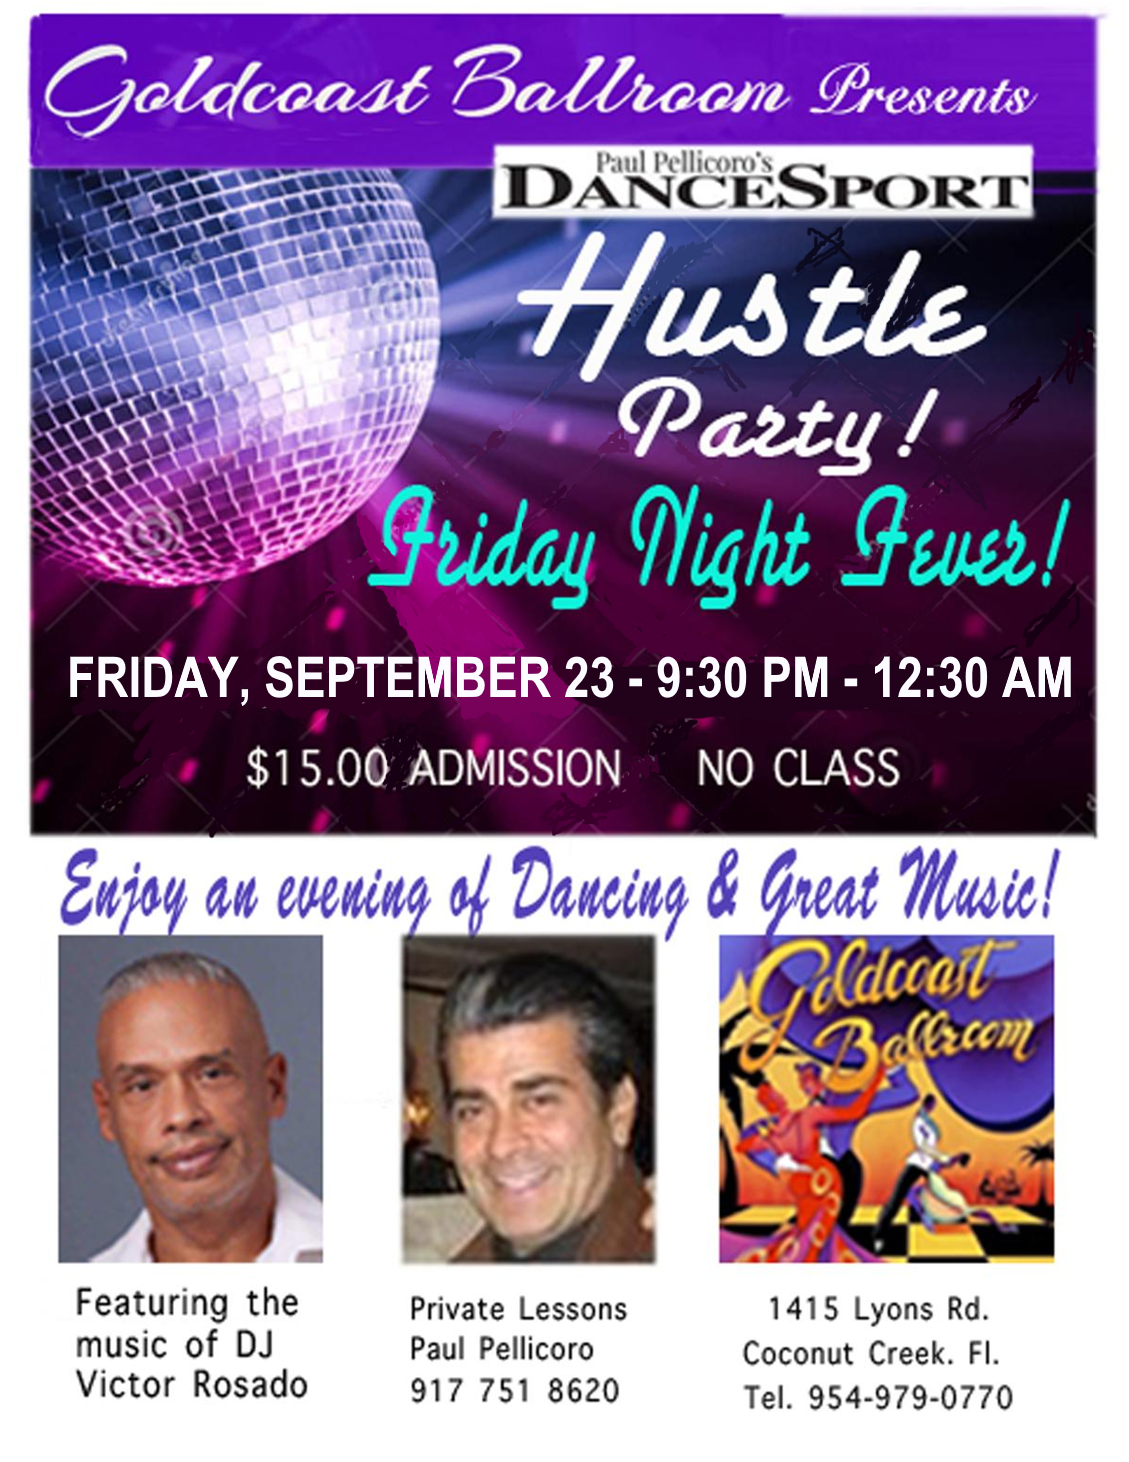 Hustle Party - Friday, September 23 - 9:30 PM - 12:30 AM